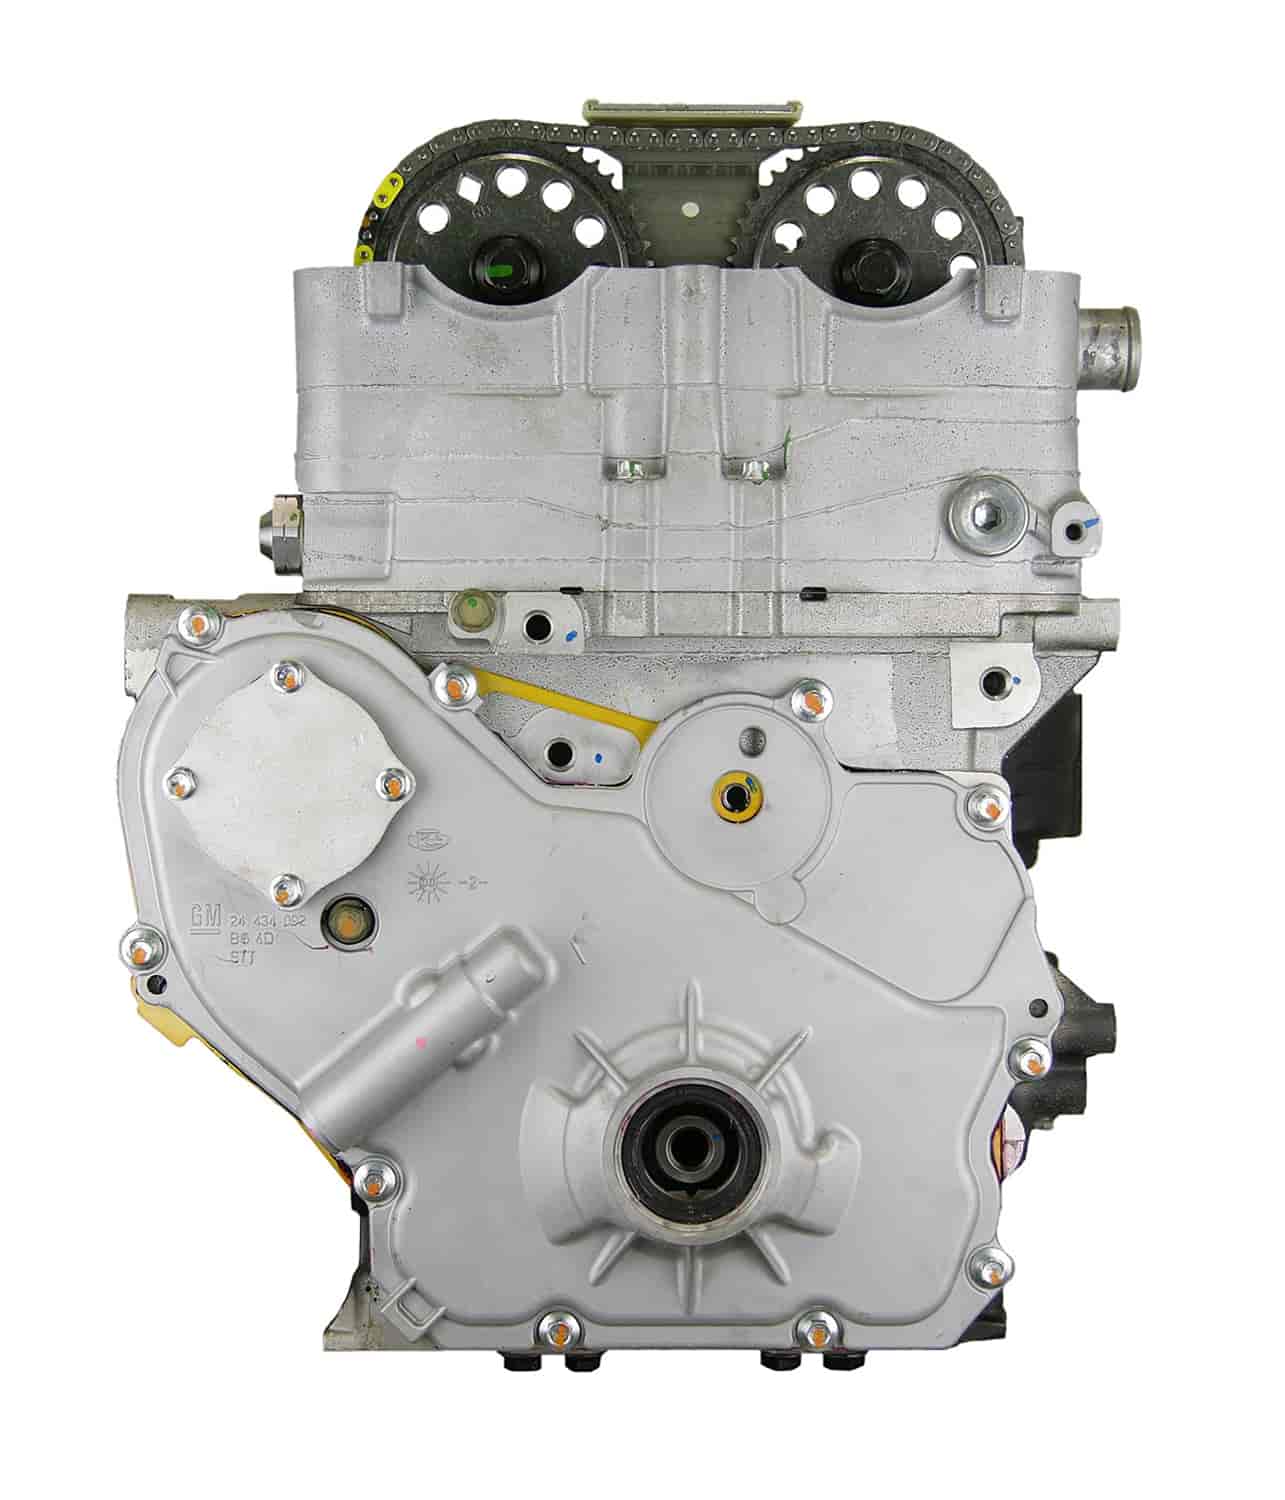 Remanufactured Crate Engine for 2002-2005 Chevy/Saturn Car with 2.2L L4